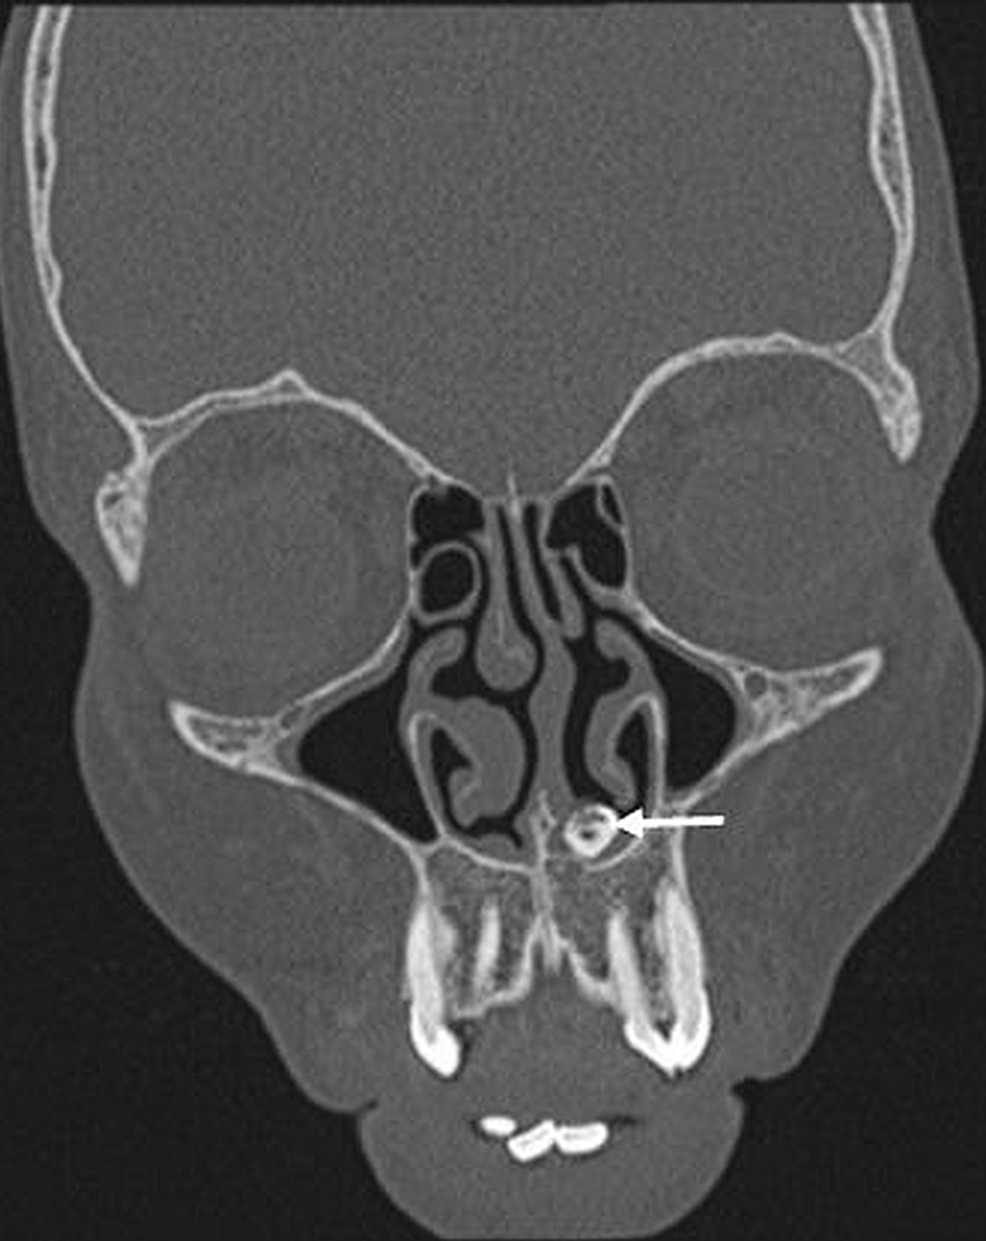 Coronal-image-showing-a-bone-like-structure-(white-arrow)-embedded-in-the-hard-palate-extending-into-the-left-nasal-cavity.